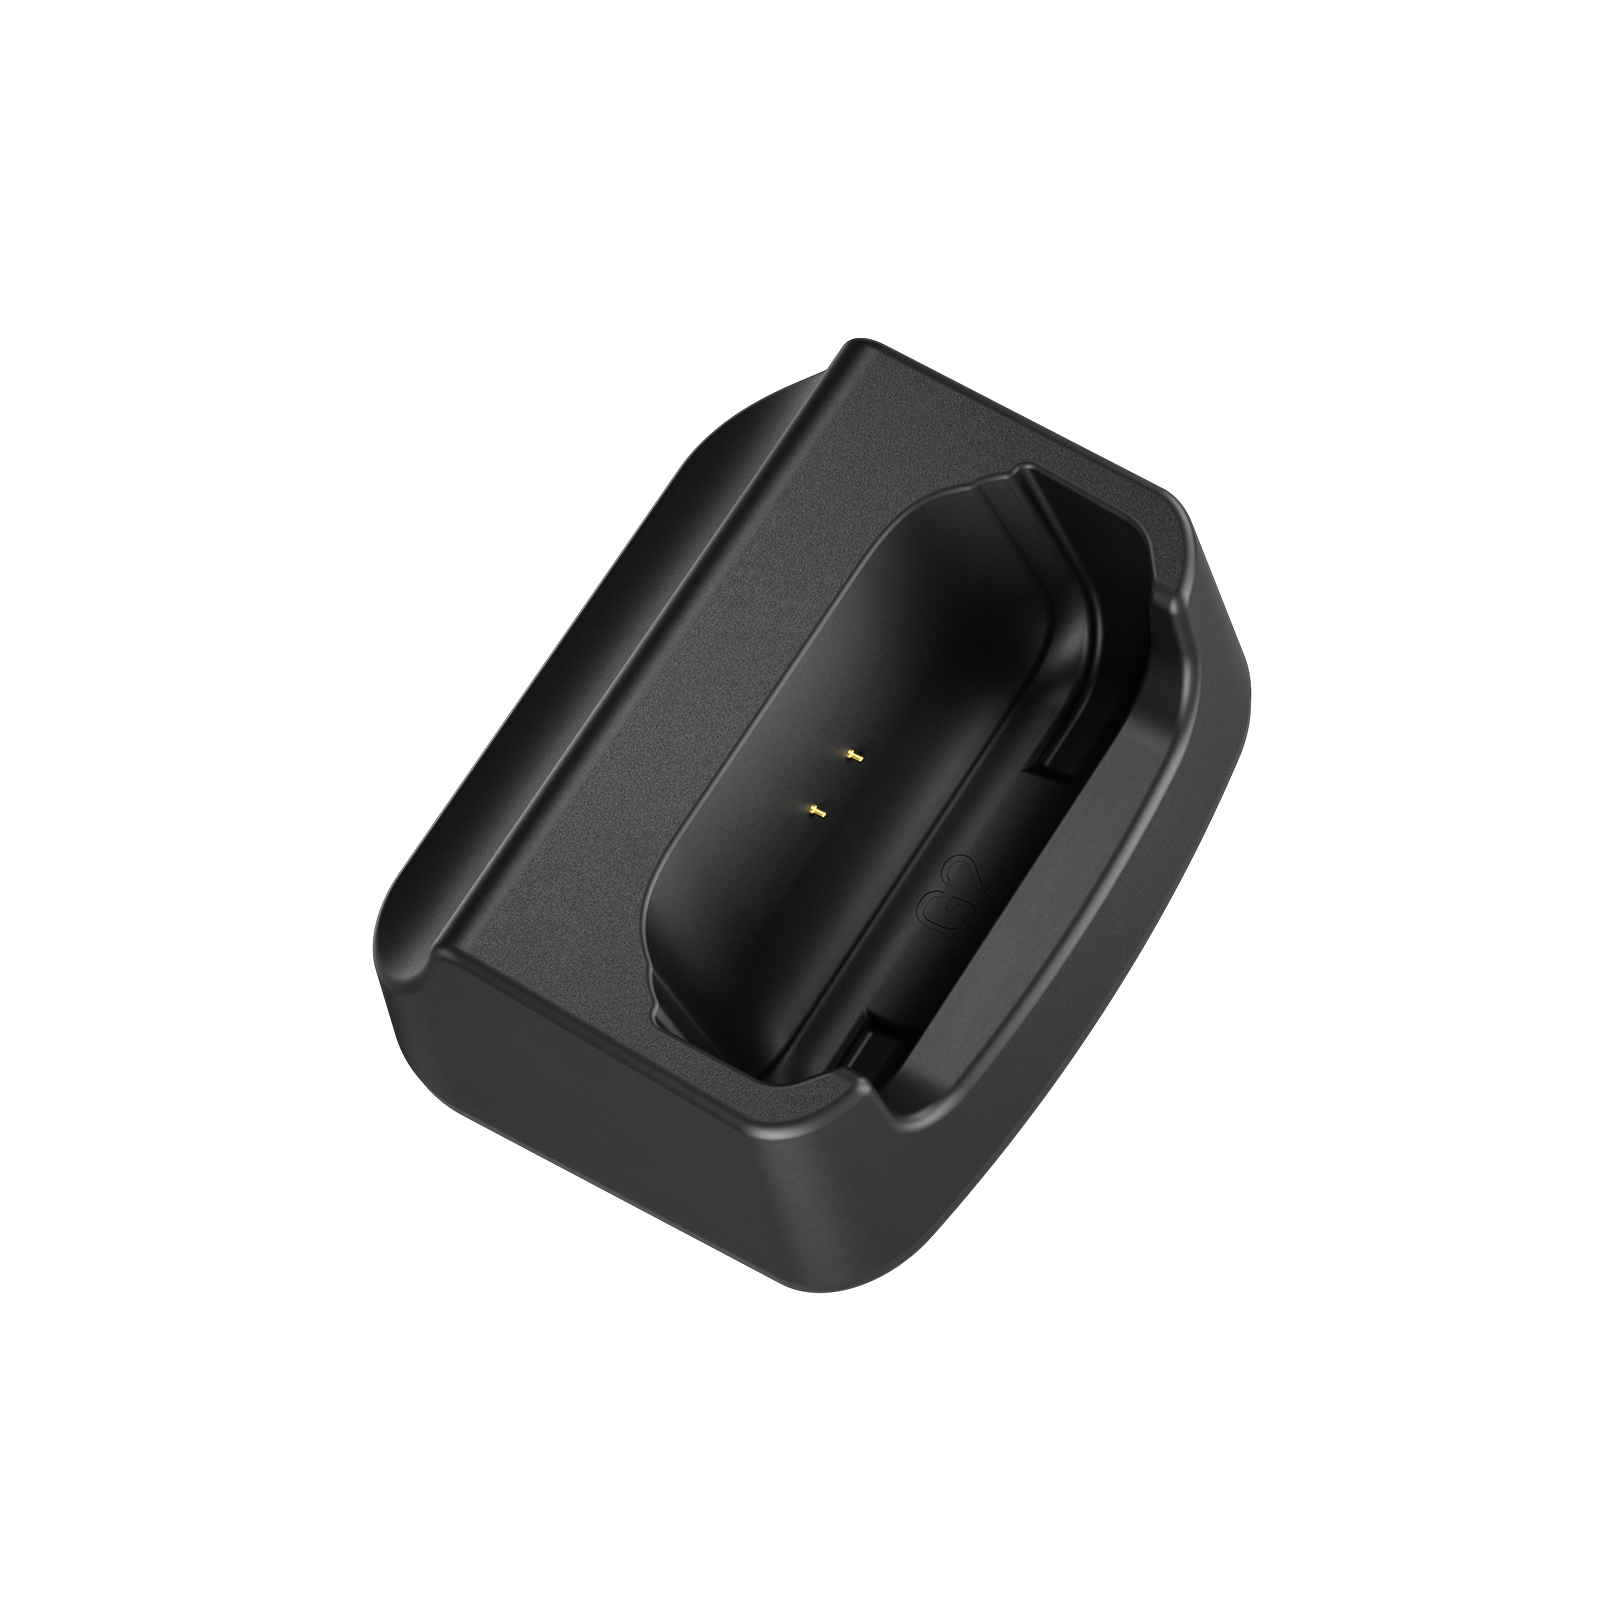 Desk Charging Dock for AGM G2 GUARDIAN / AGM G2 PRO / AGM G2